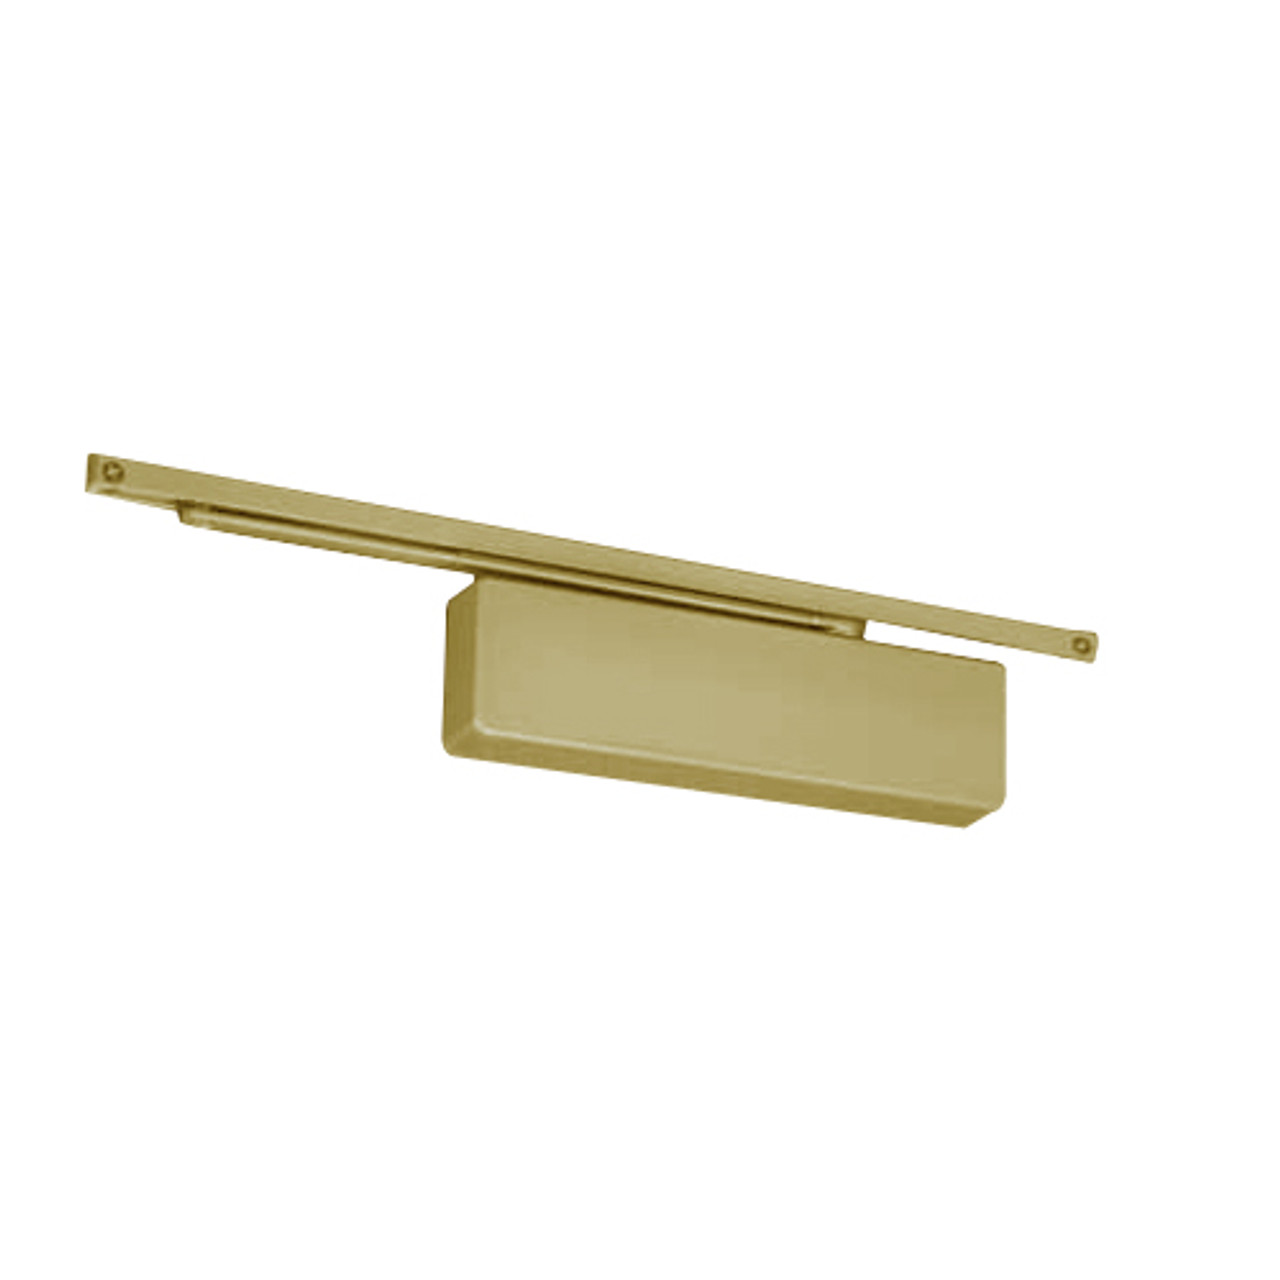 7540STM-696 Norton 7500 Series Non-Hold Open Institutional Door Closer with Pull Side Low Profile Slide Track in Gold Finish